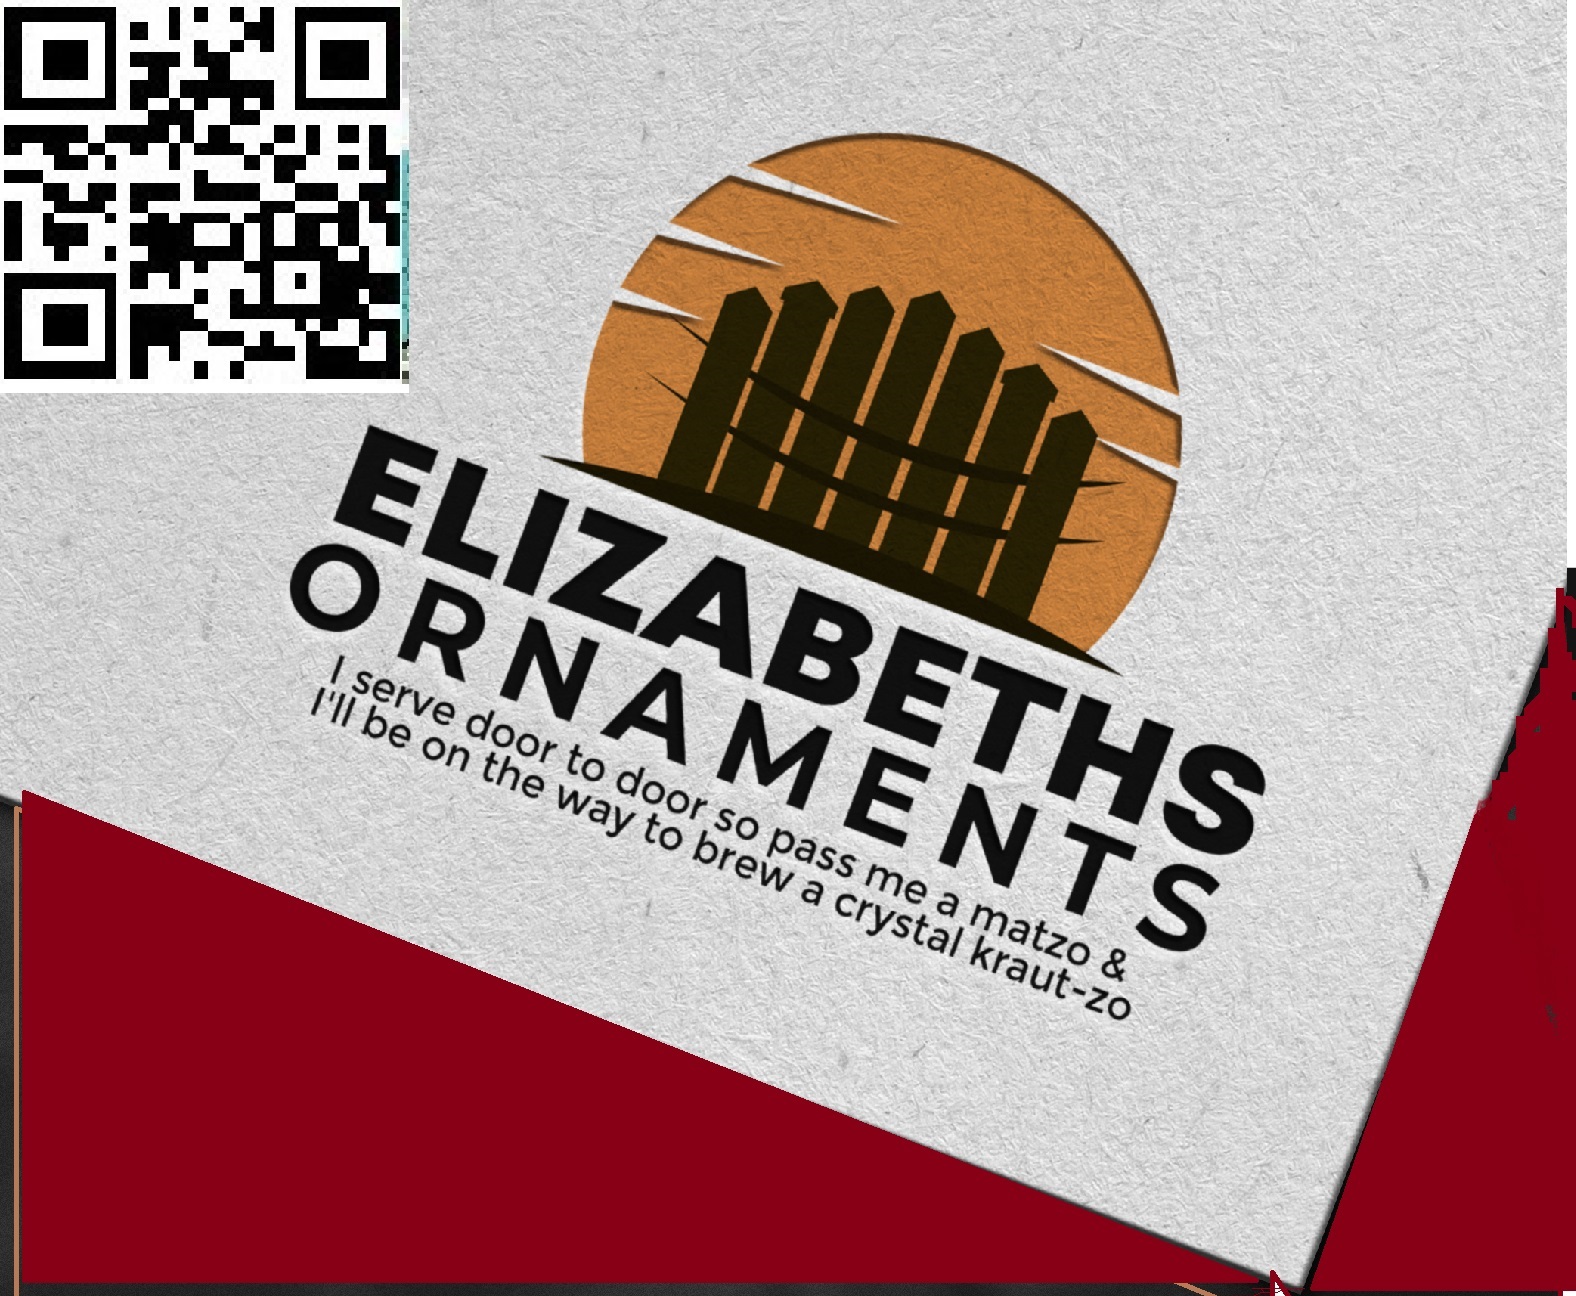 Elizabeths Ornaments is a pawnshop with delivery in Maryland USA